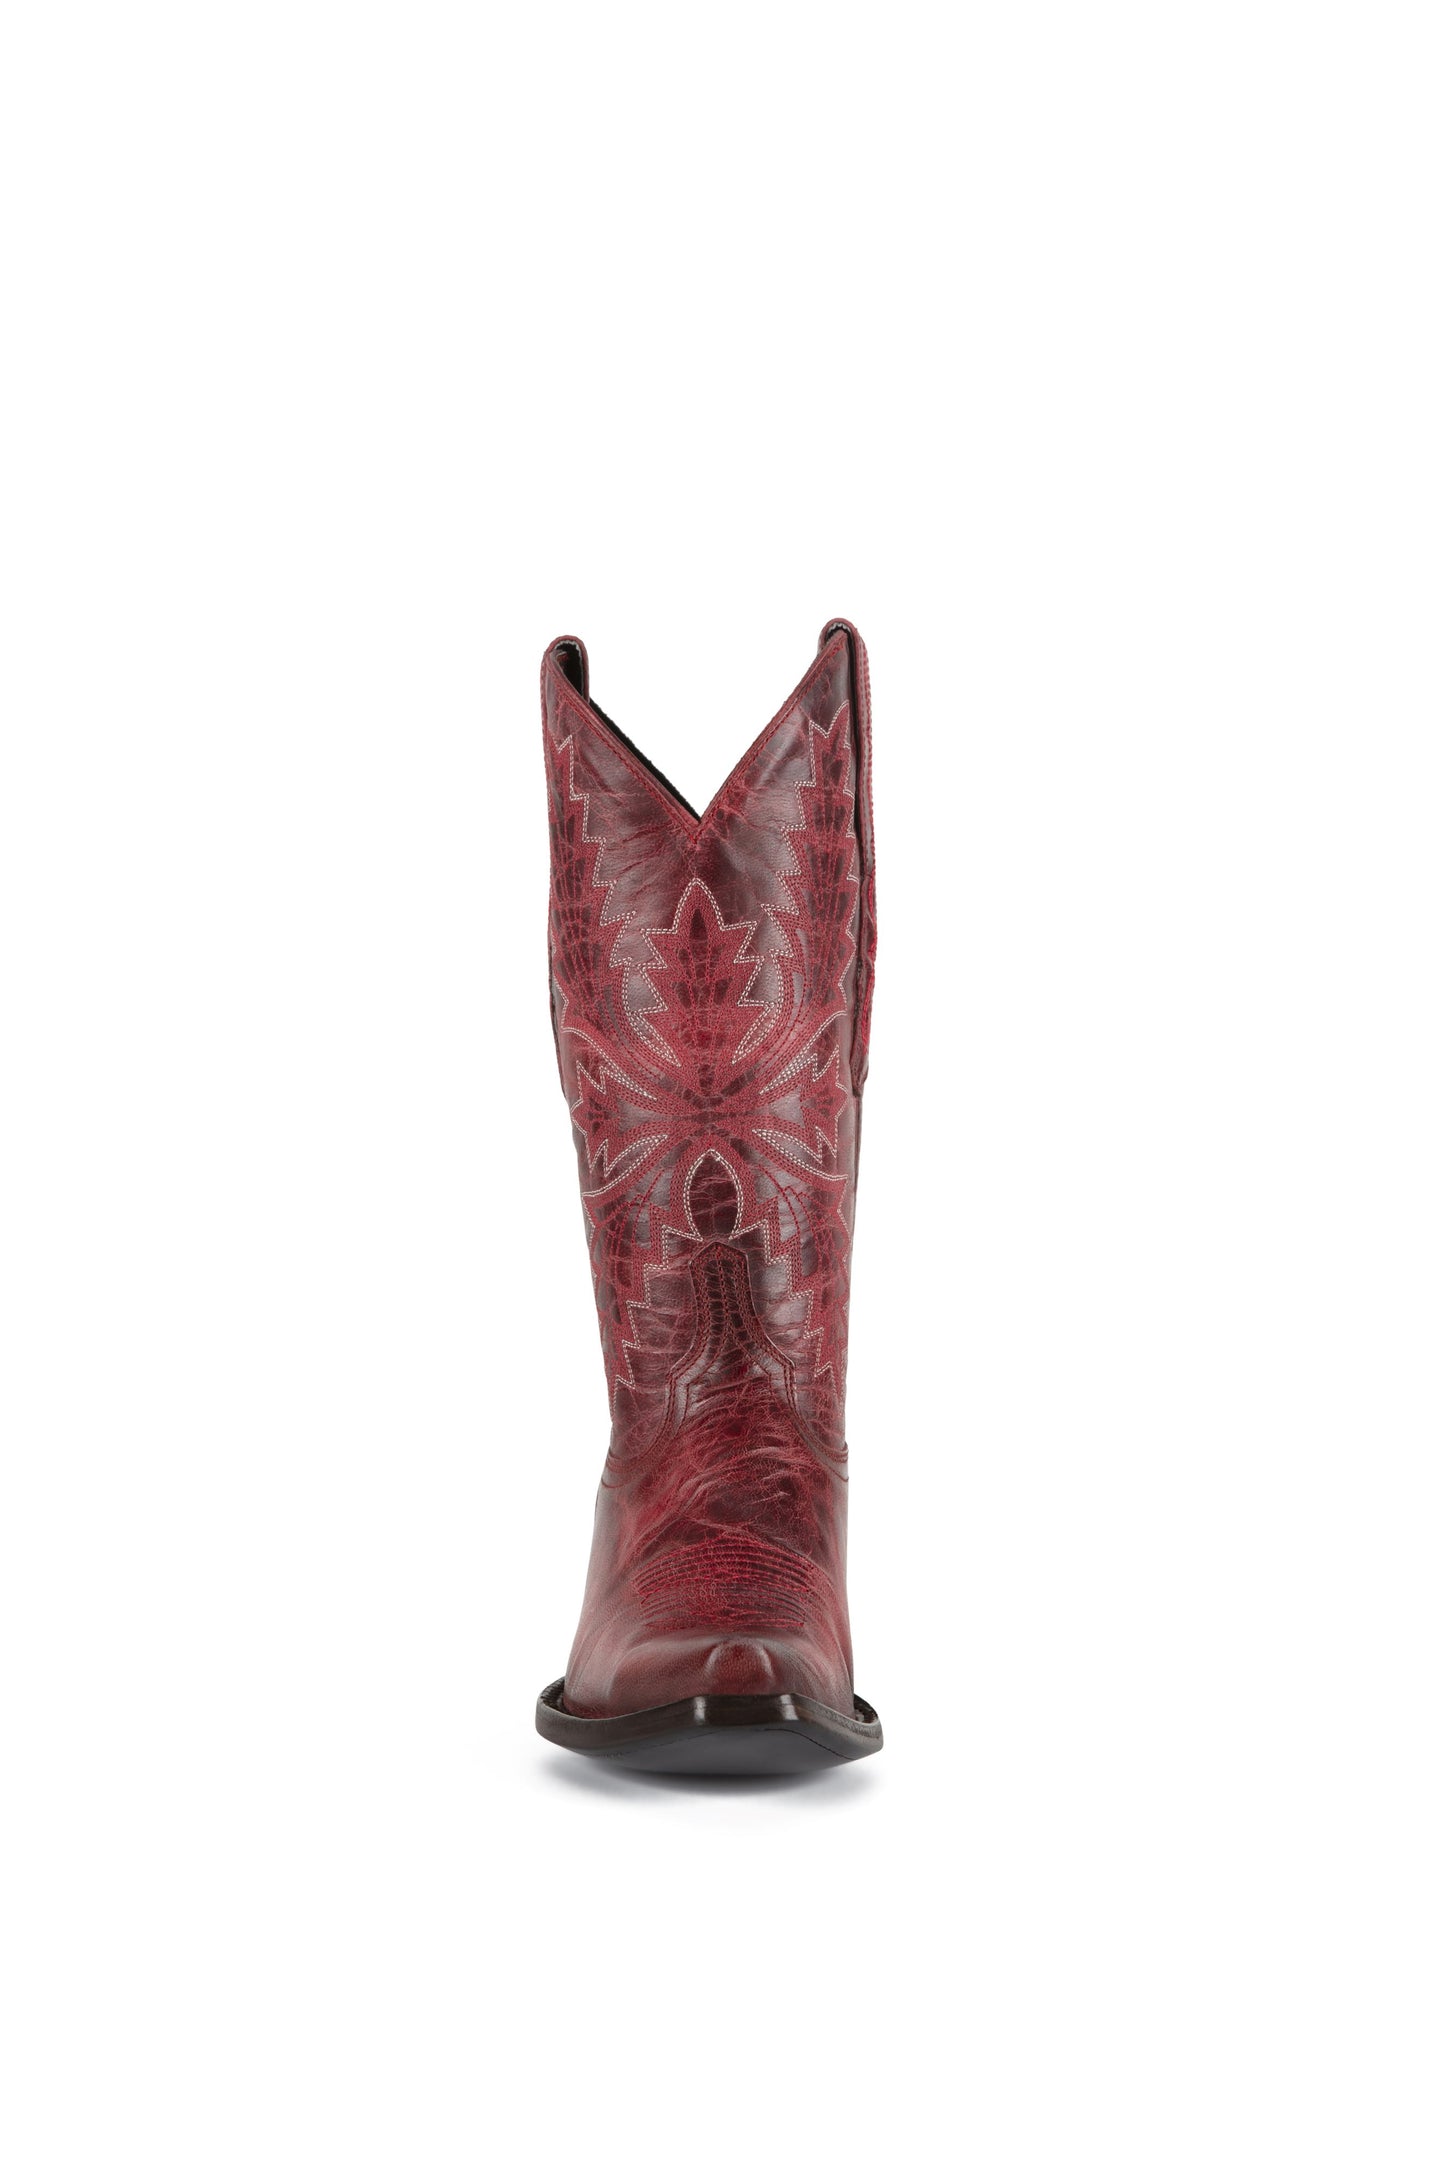 Allens Brand - Mad Dog Goat - Pointed Toe - Red